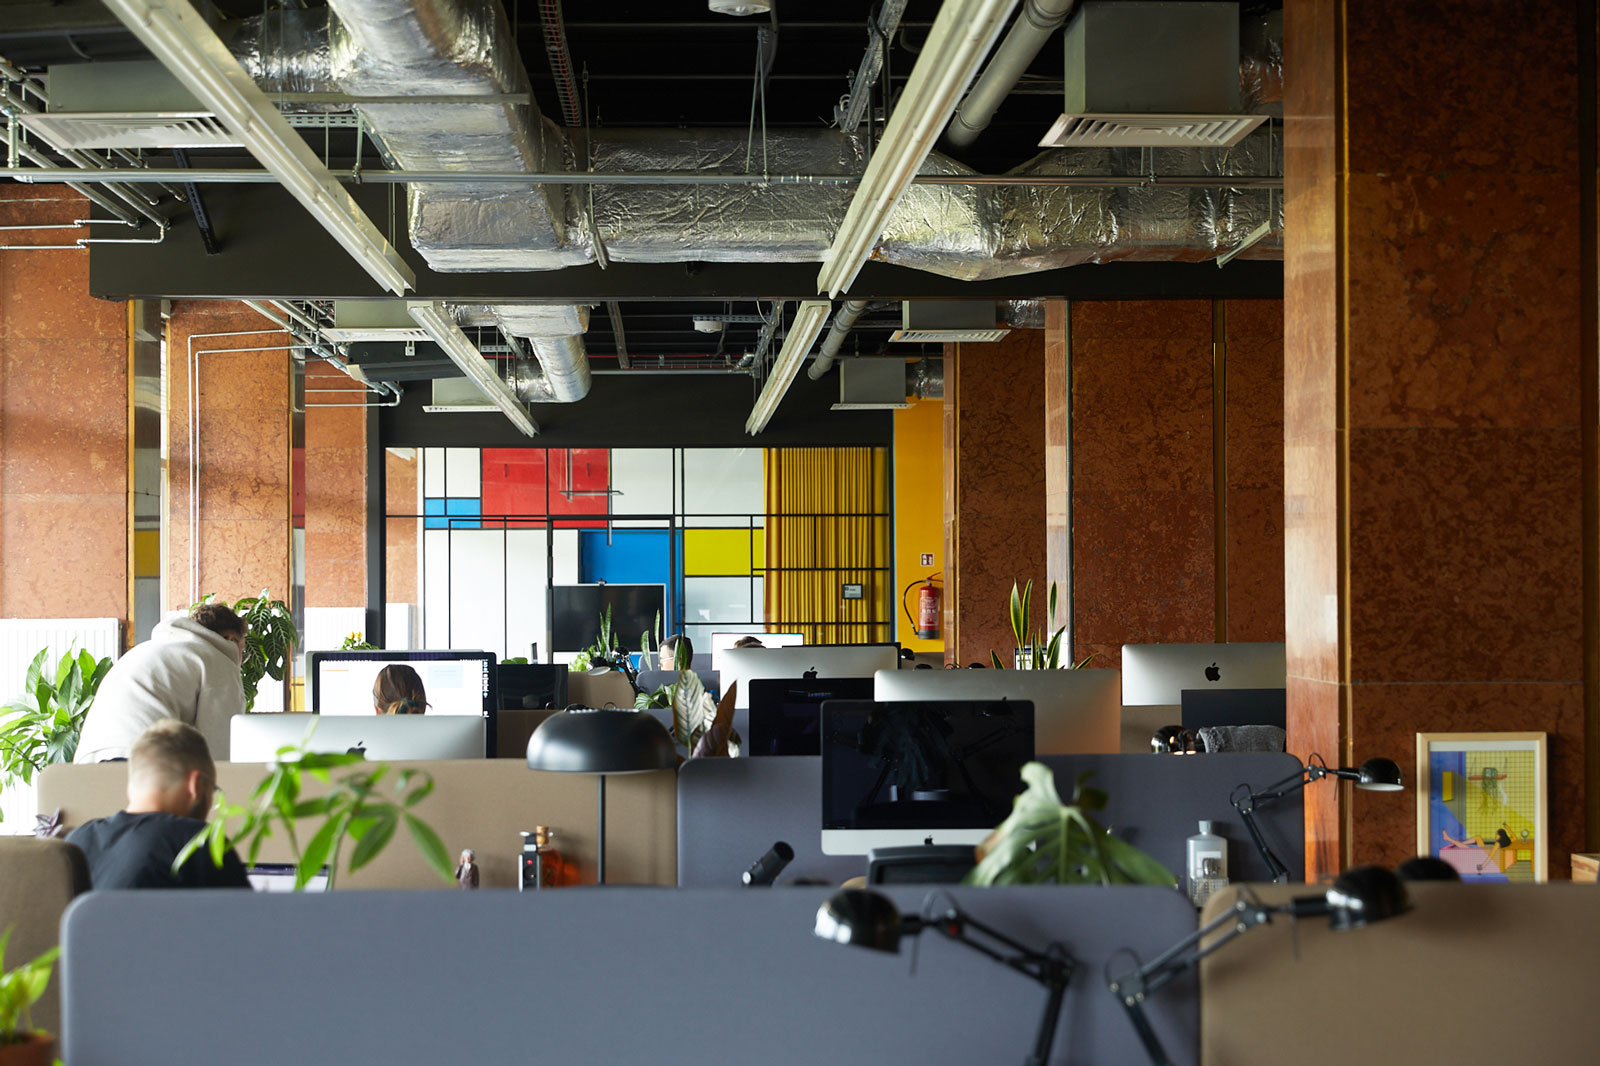 Adchitects office for TechBehemoths interview with Kuba Luty